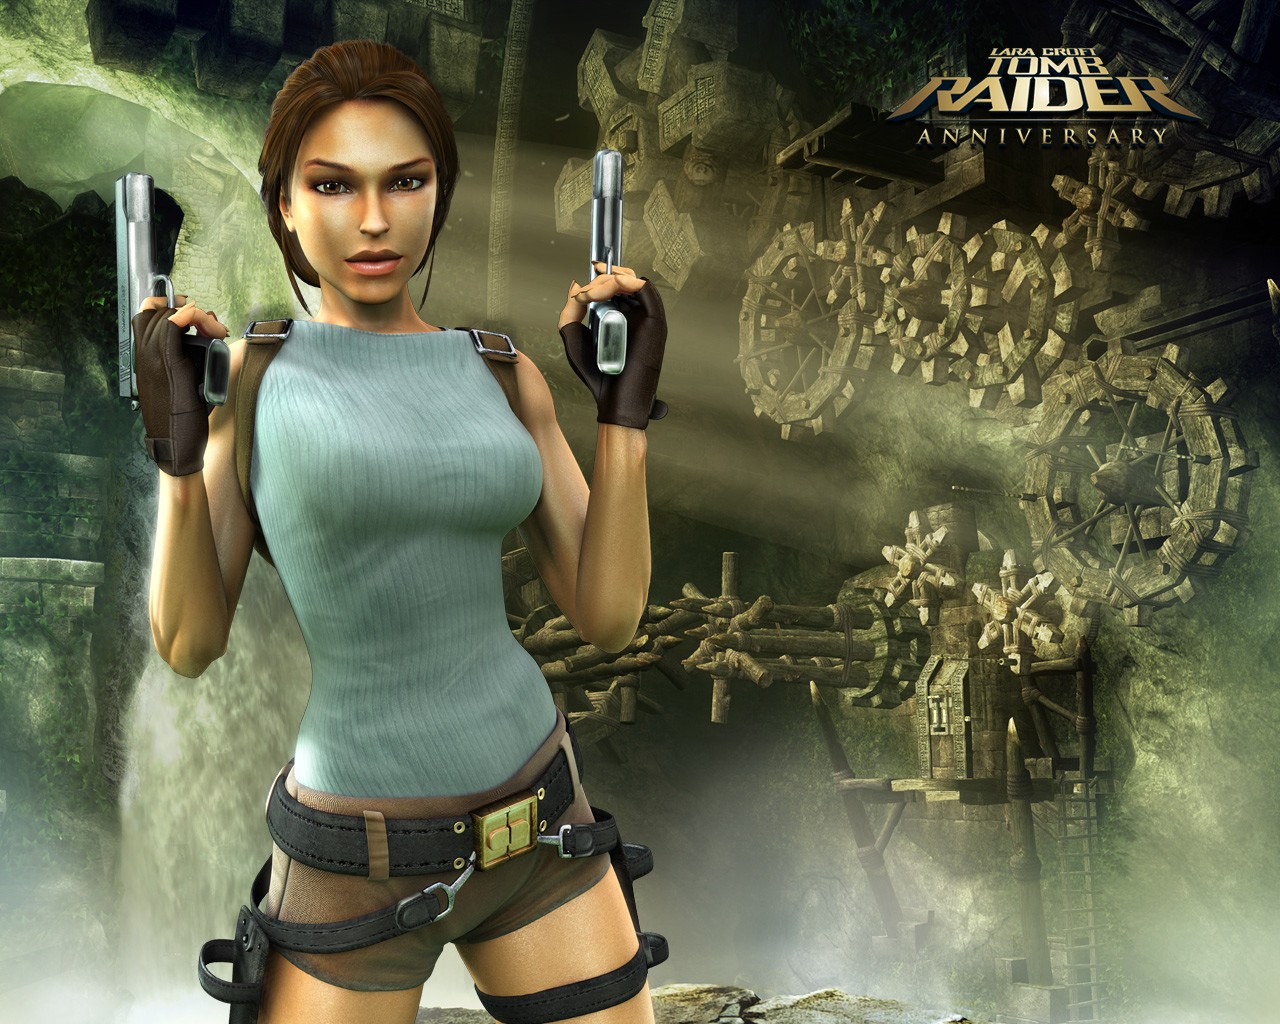 General 1280x1024 video games Tomb Raider girls with guns gun weapon PC gaming video game girls dual wield Lara Croft (Tomb Raider) Tomb Raider: Anniversary video game characters